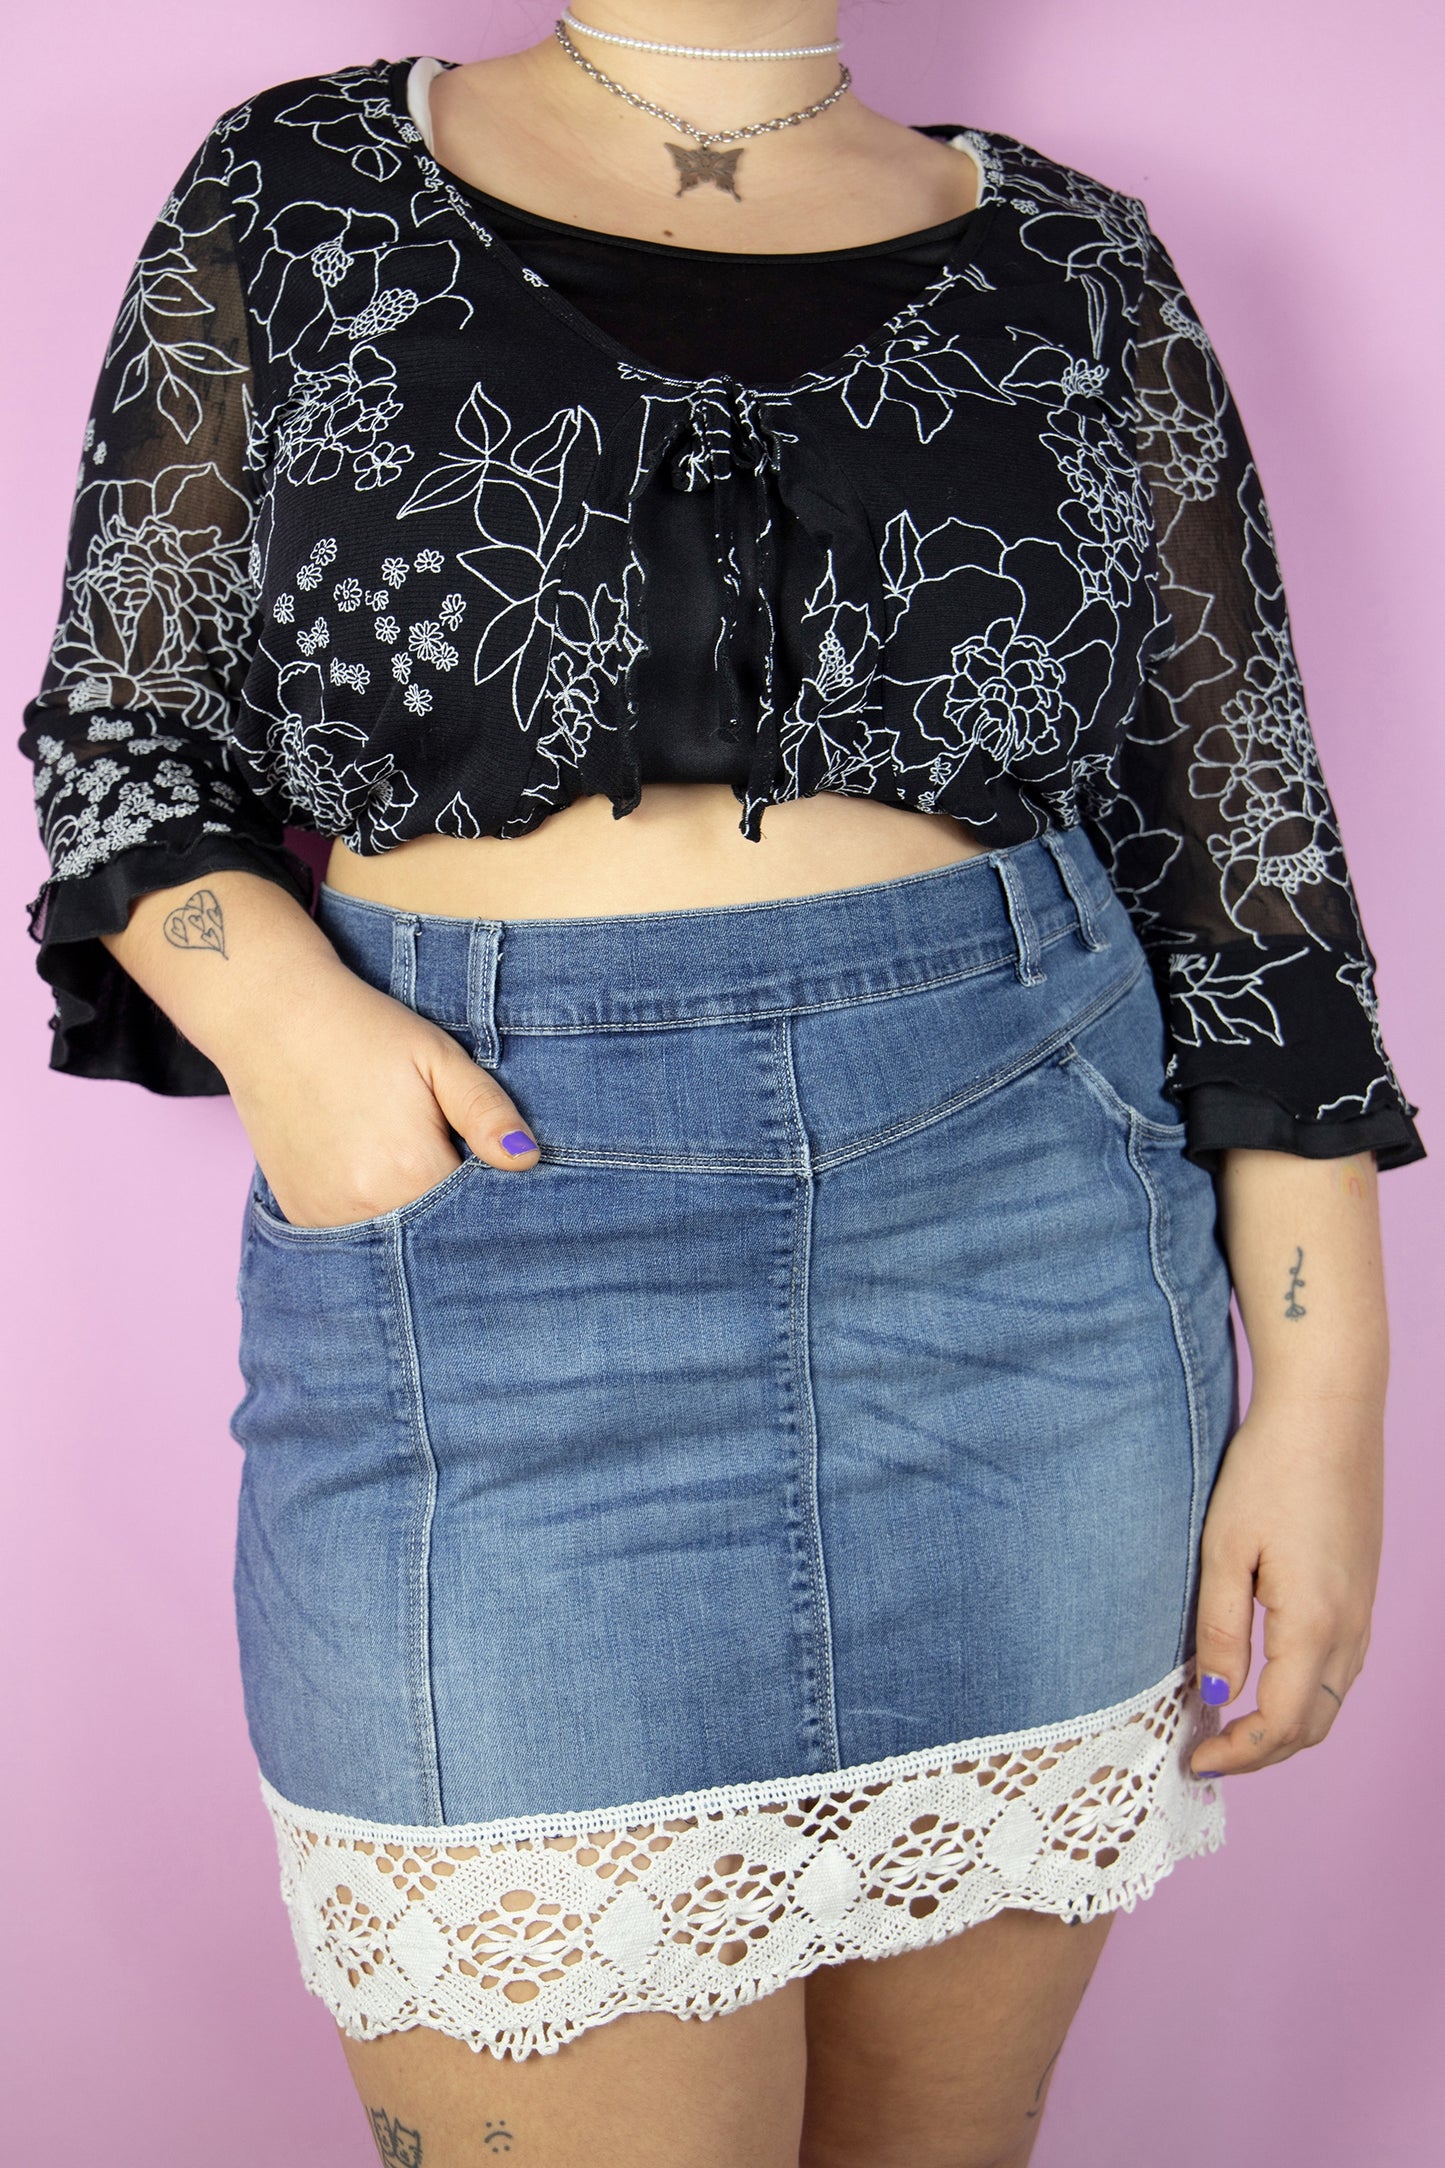 The Y2K Boho Denim Mini Skirt is a vintage stretchy skirt adorned with white crochet lace trim. Cyber 2000s summer jean mini skirt.